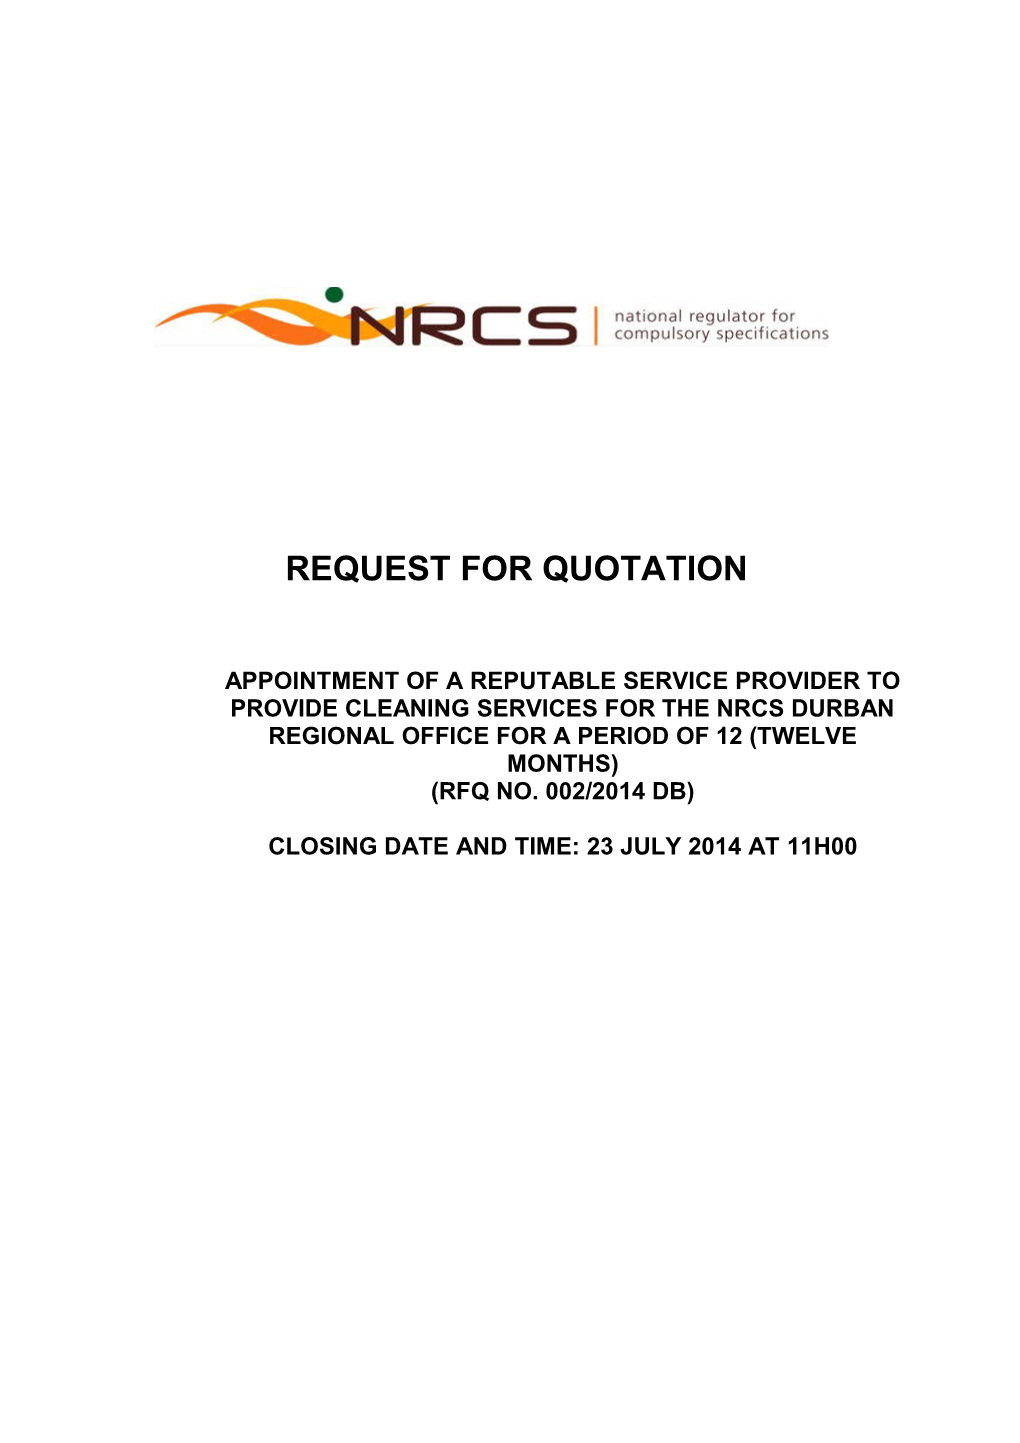 Request for Quotation s13